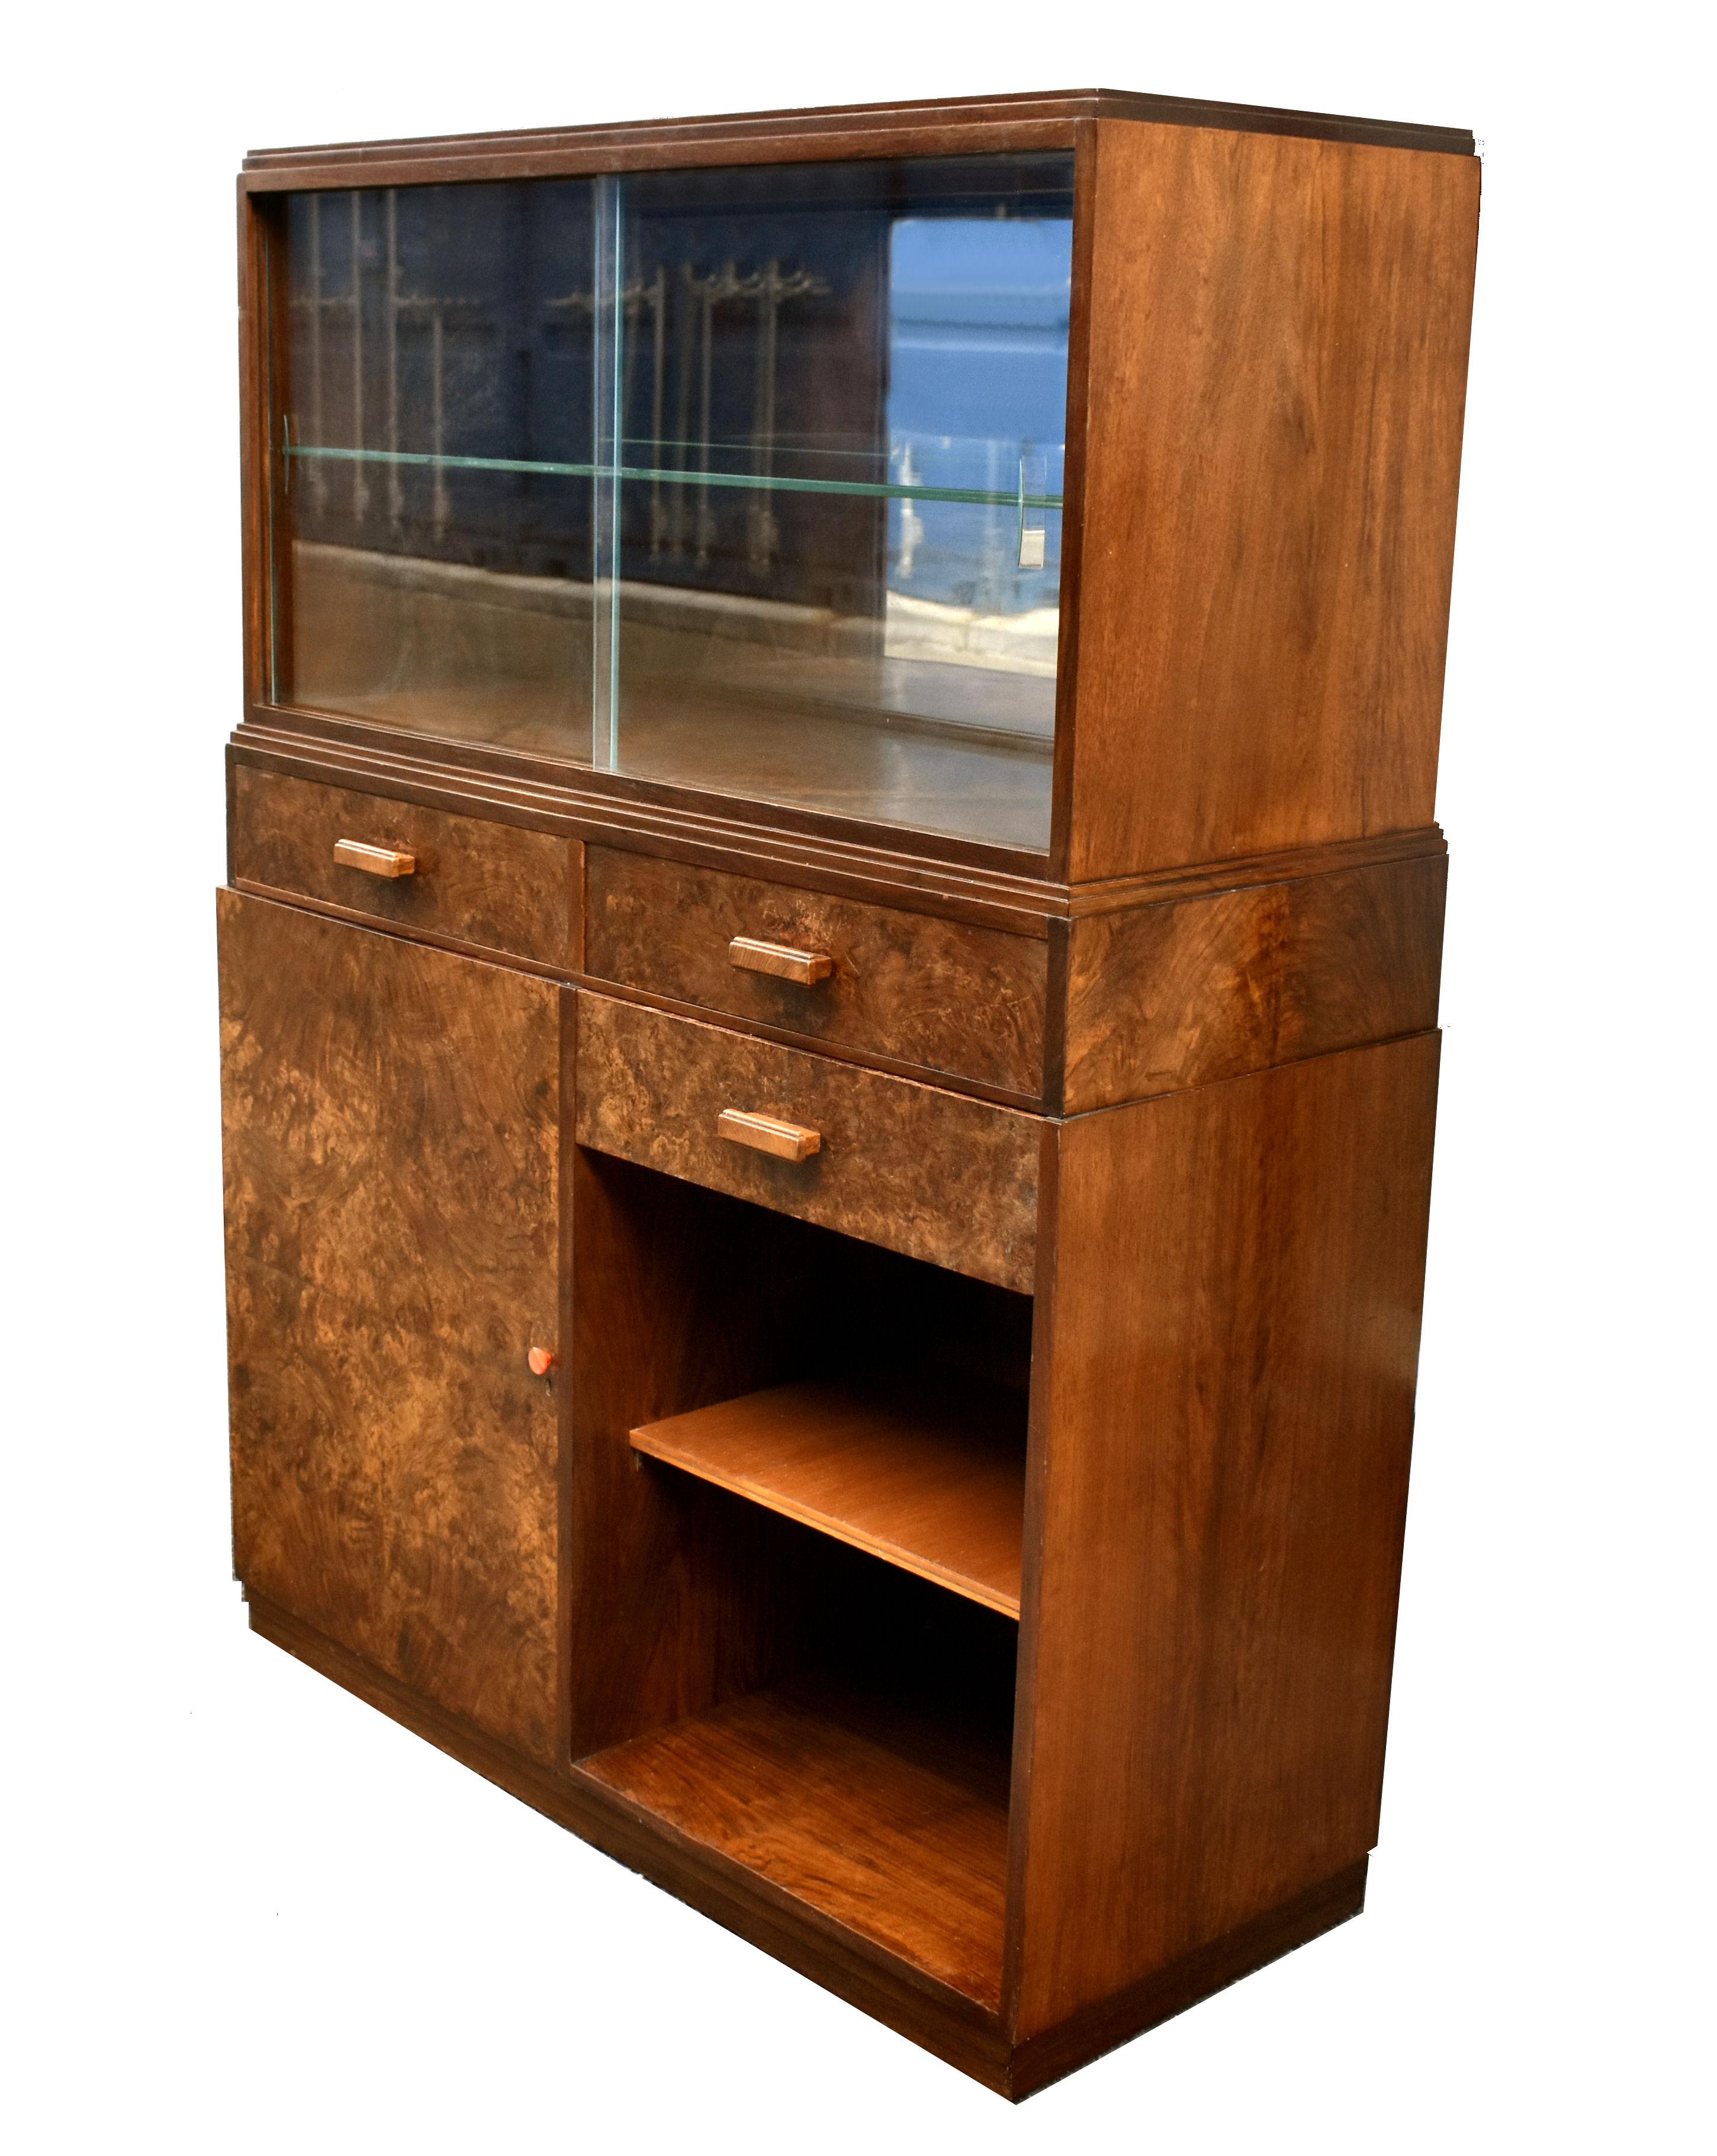 For your consideration is this rather stylish 1930s Art Deco English drinks cabinet. Fabulous piece of furniture with not only kerb side appeal but very functional too. The top section has two clear glass glazed sliding doors giving access to a